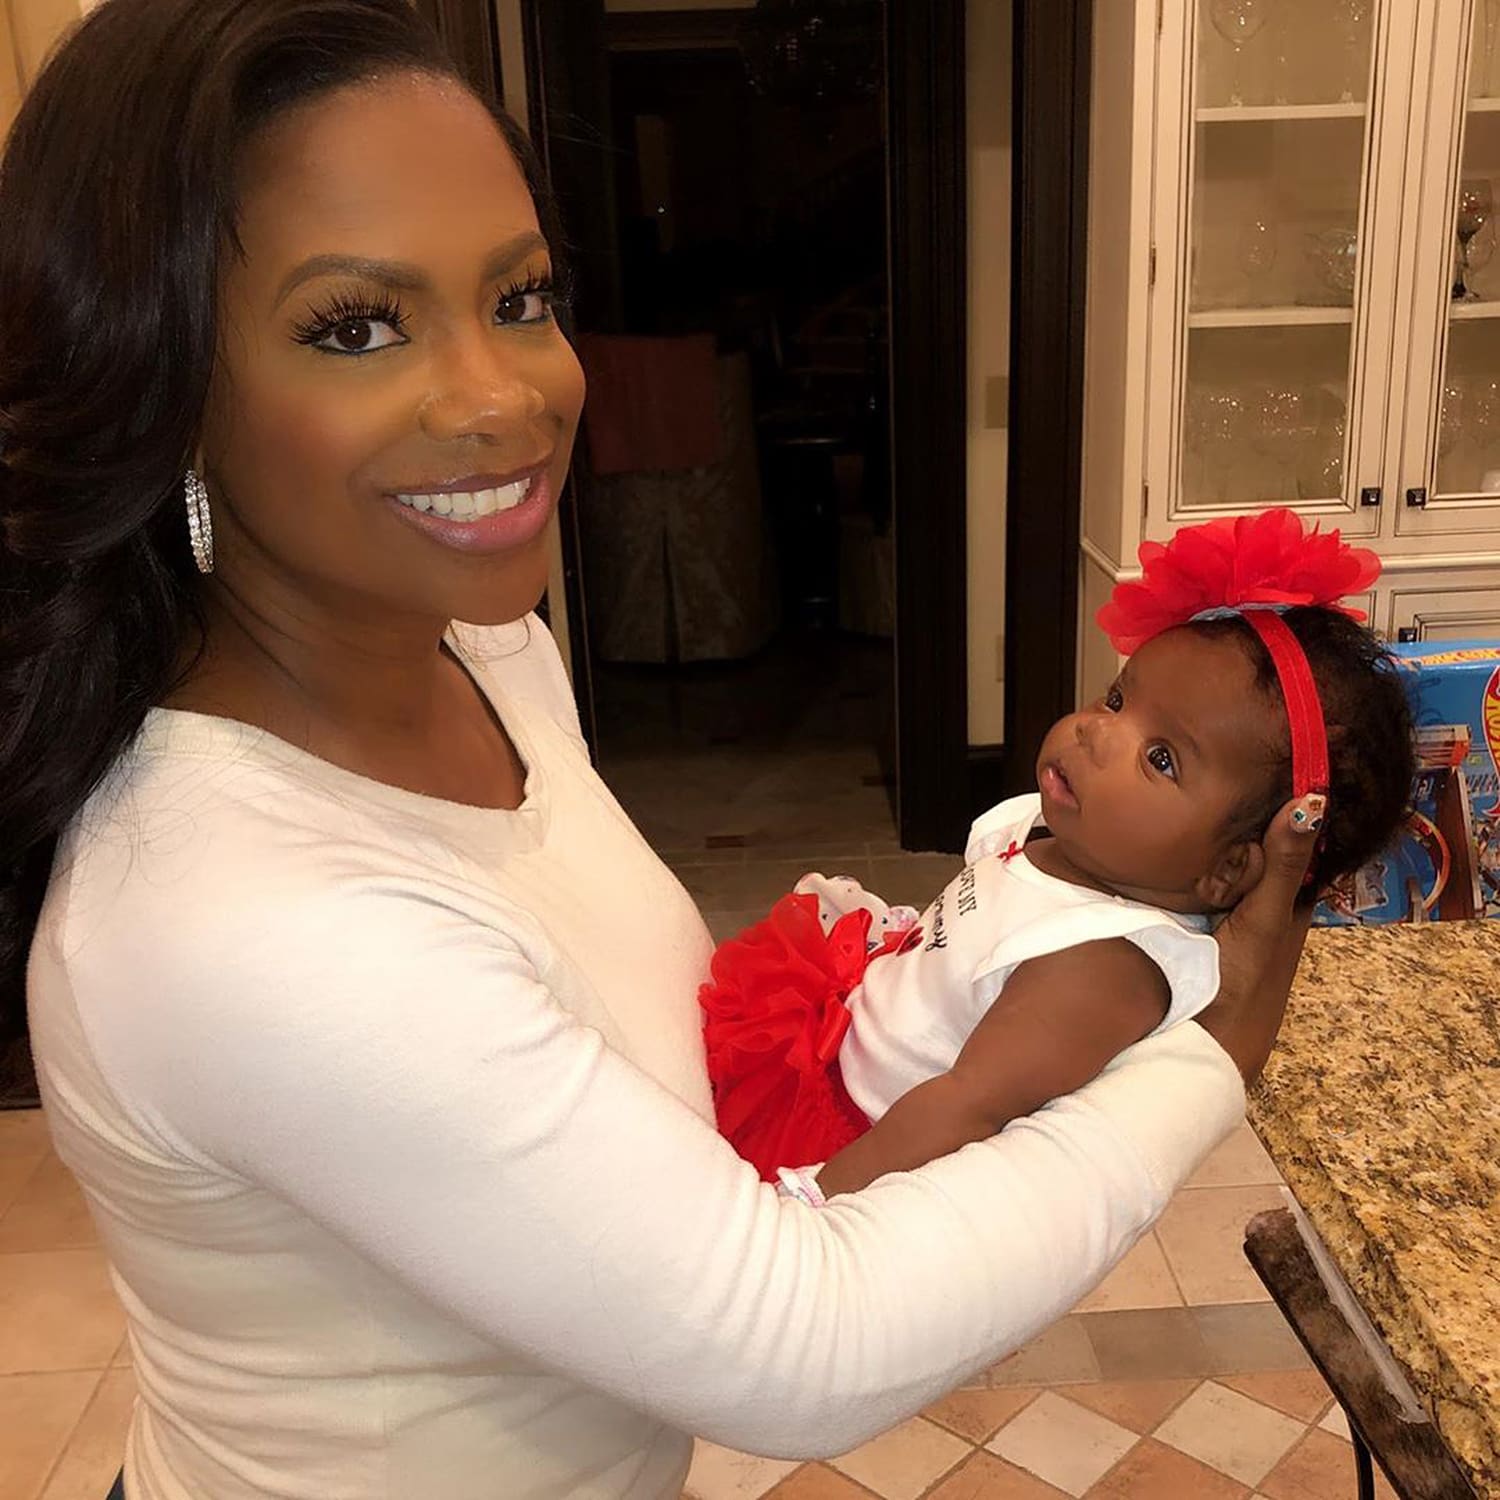 Kandi Burruss' Baby Girl Blaze Tucker Has A Message For Fans - See The Video